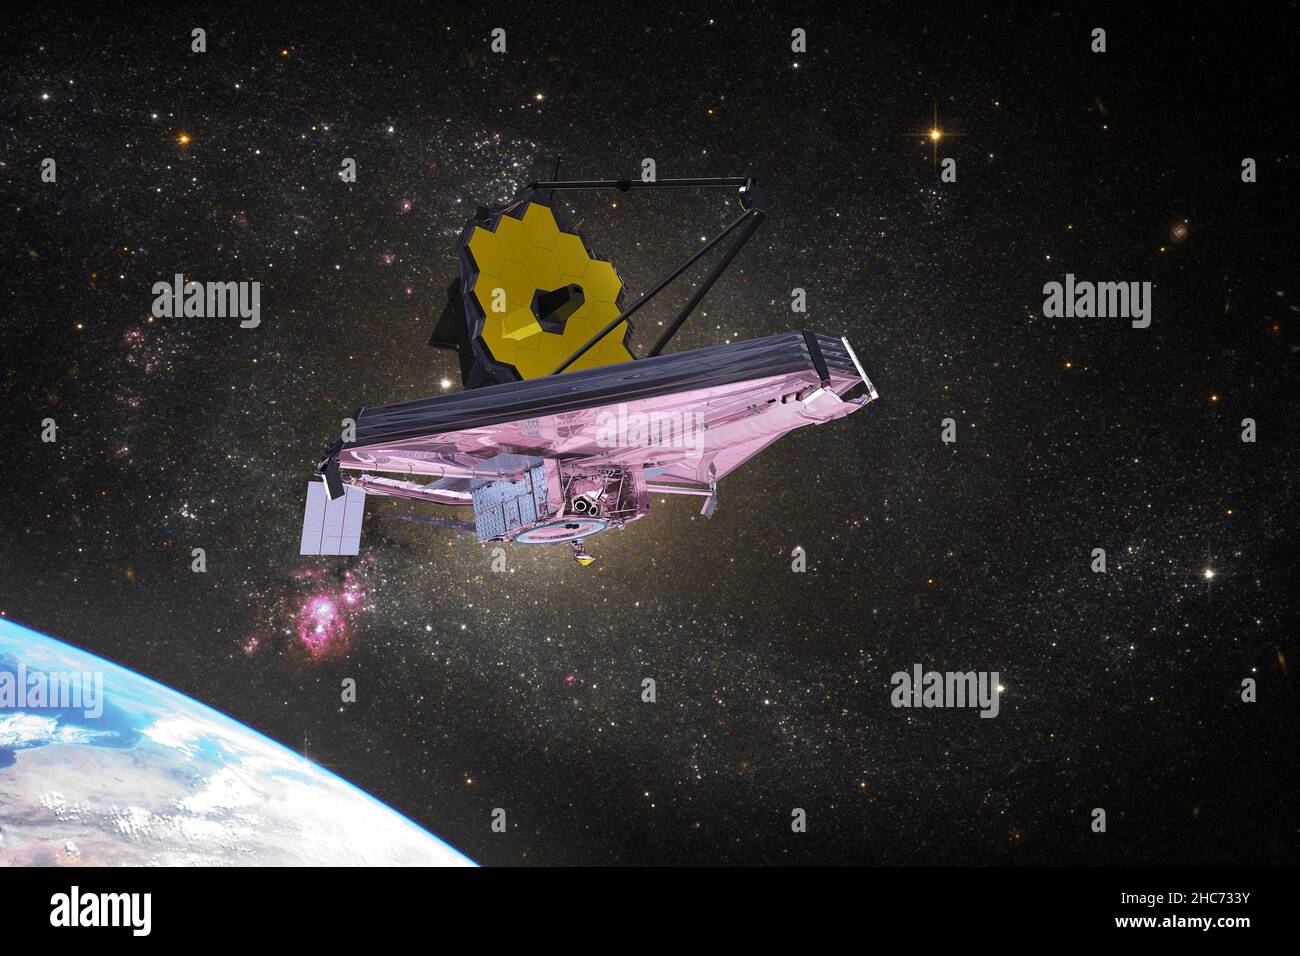 Newest Forever Stamp Honors the Mission of the James Webb Space